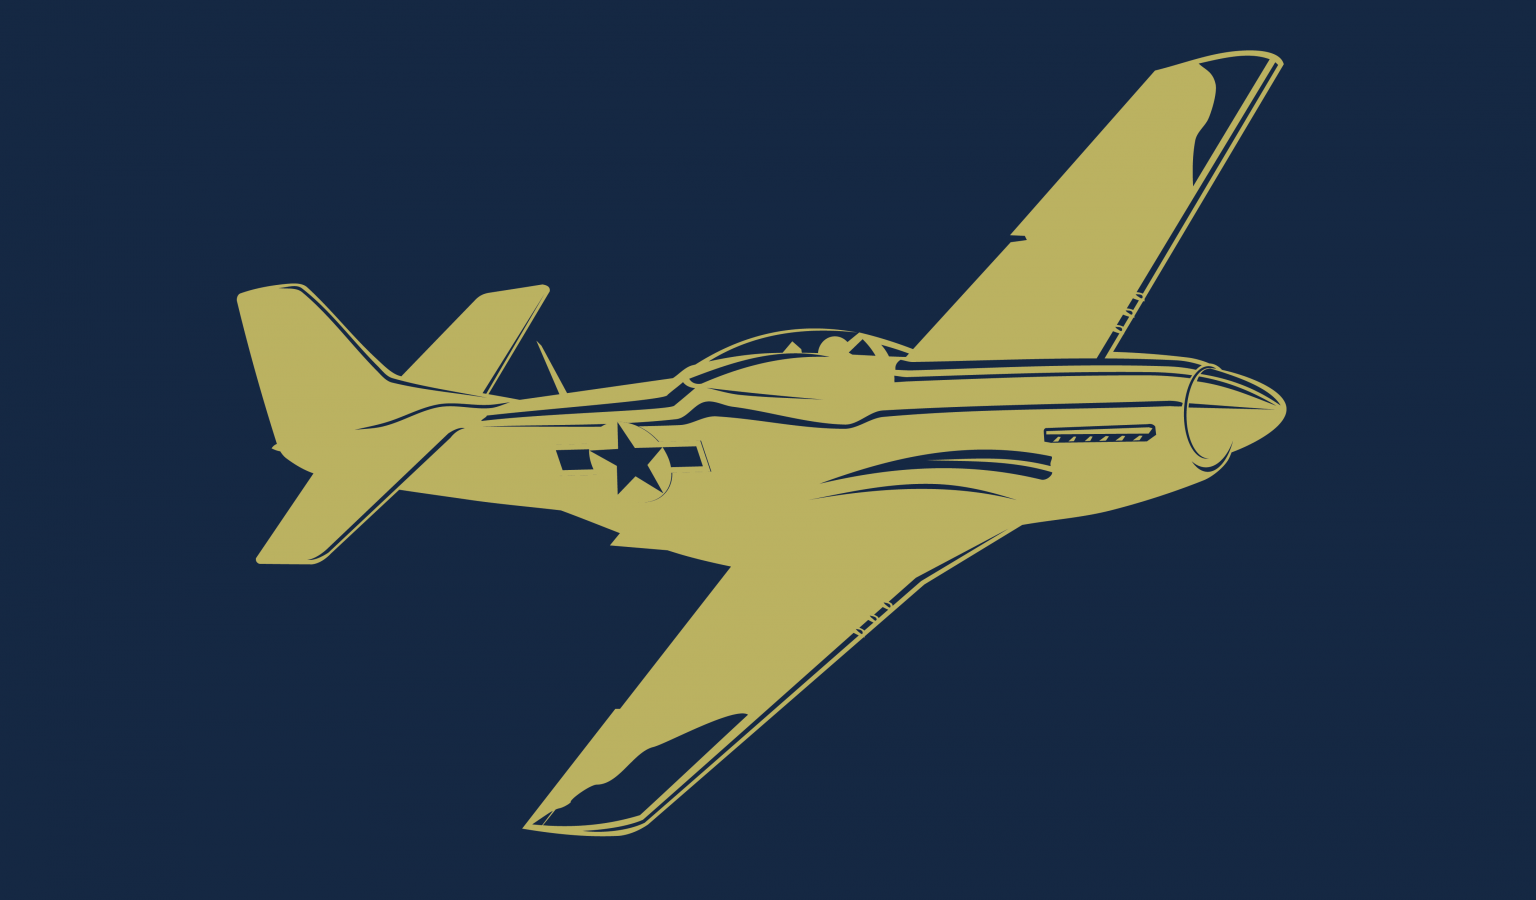 Mustang_private_sale_Spitfire-02